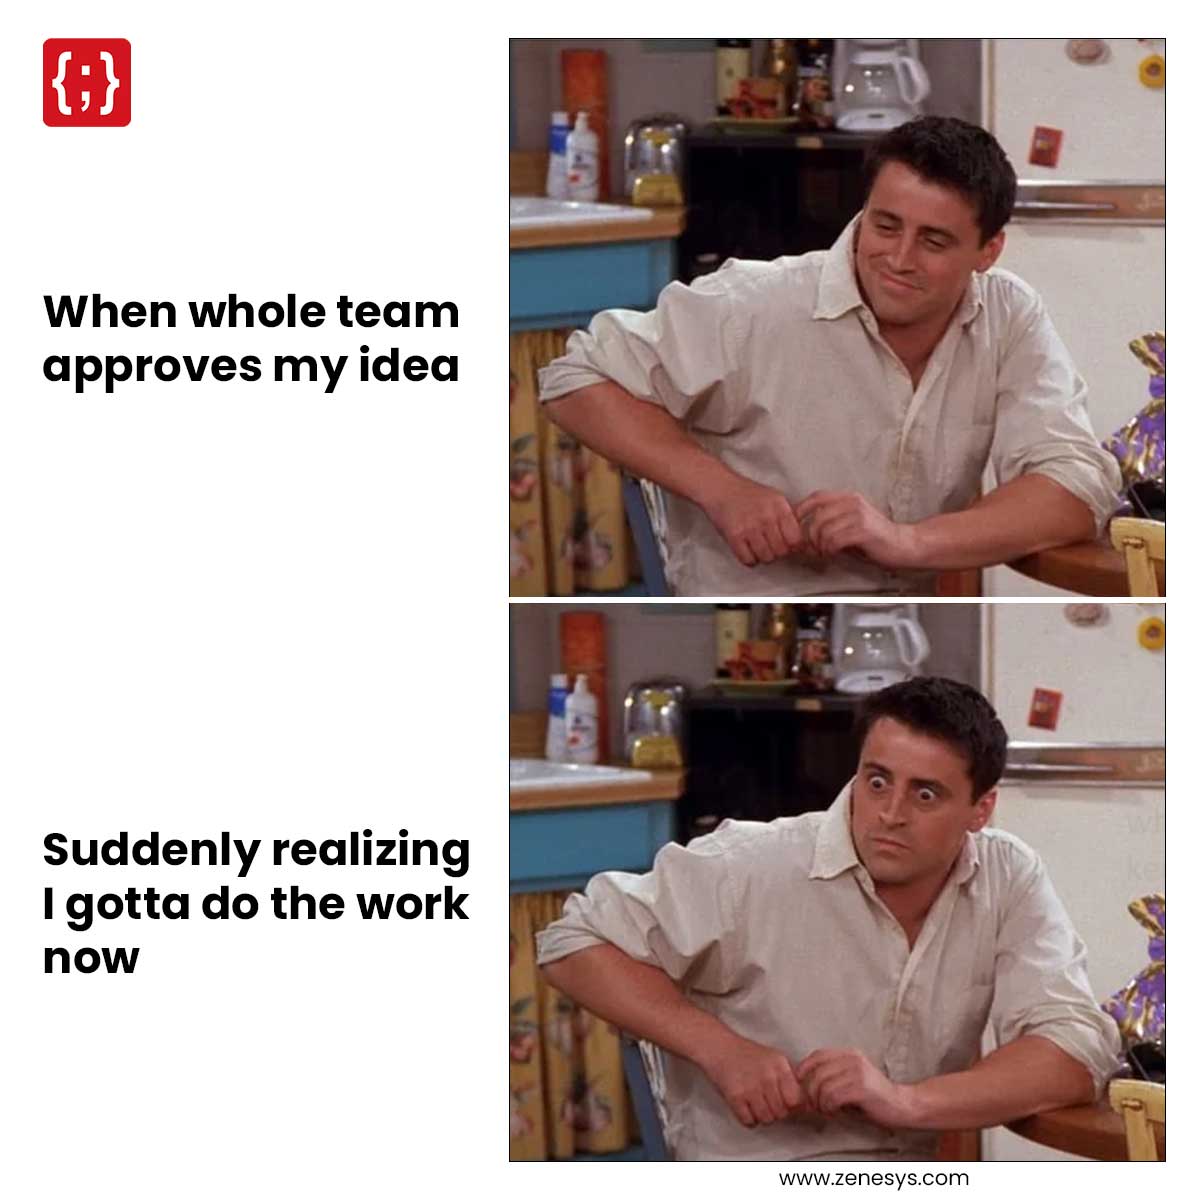 That feeling when everyone loves your idea... until you remember you're the one who has to do all the work. #Fridaymeme #Fridayvibes #Memelife #CorporateMeme #developers #Zenesys